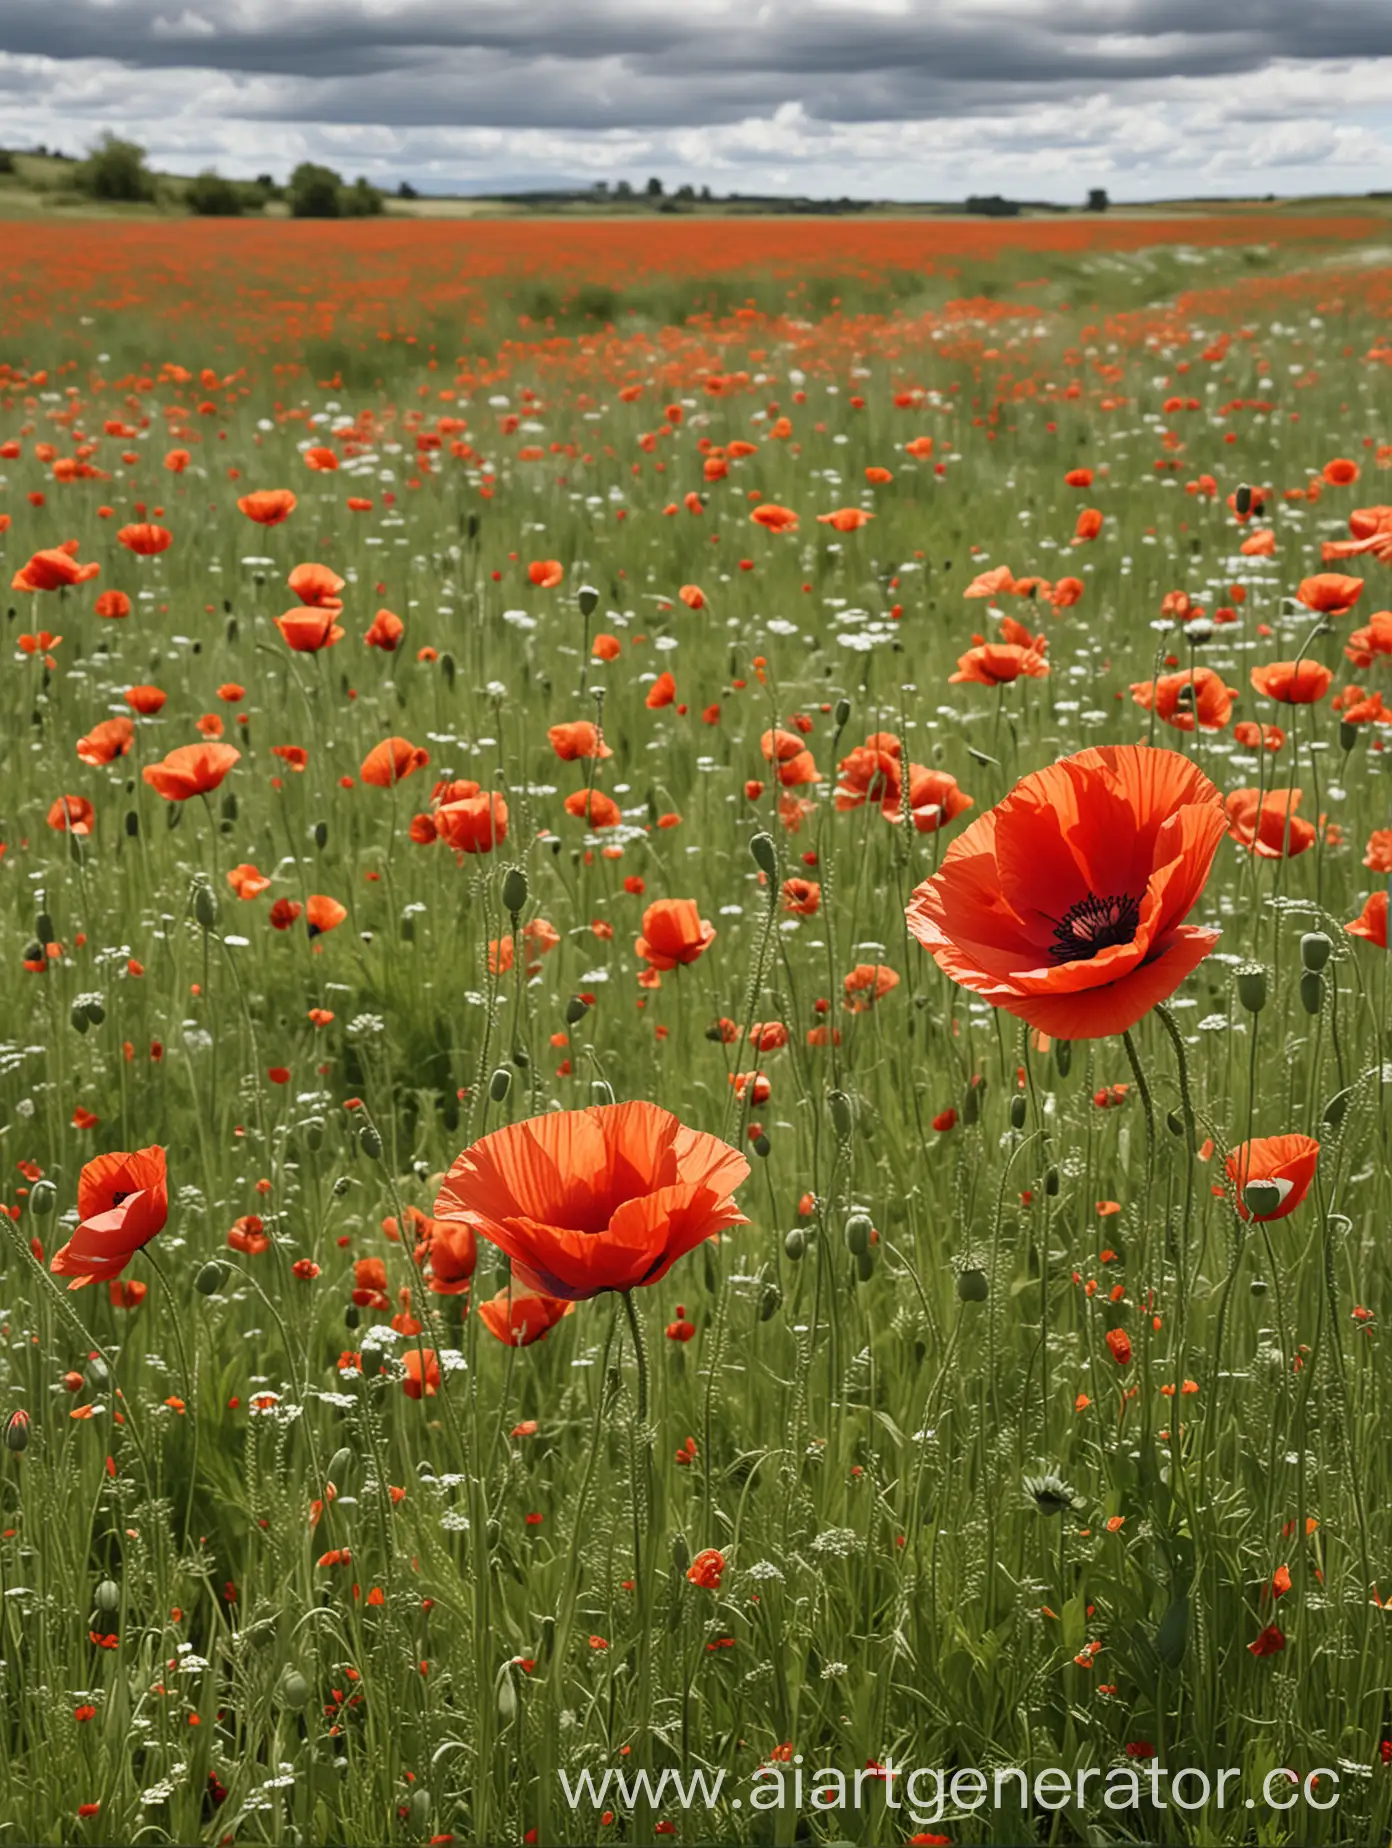 Create a rectangular image measuring 1300mm in height and 3500mm in length to maintain the proportions of the design. This image will be printed on the trailer's tarp.  Background: White Bottom section: Design a strip one-third of the total image height Illustration of grass, wildflowers, and red poppies swaying in the wind Blades of grass and poppies bending sideways due to strong wind